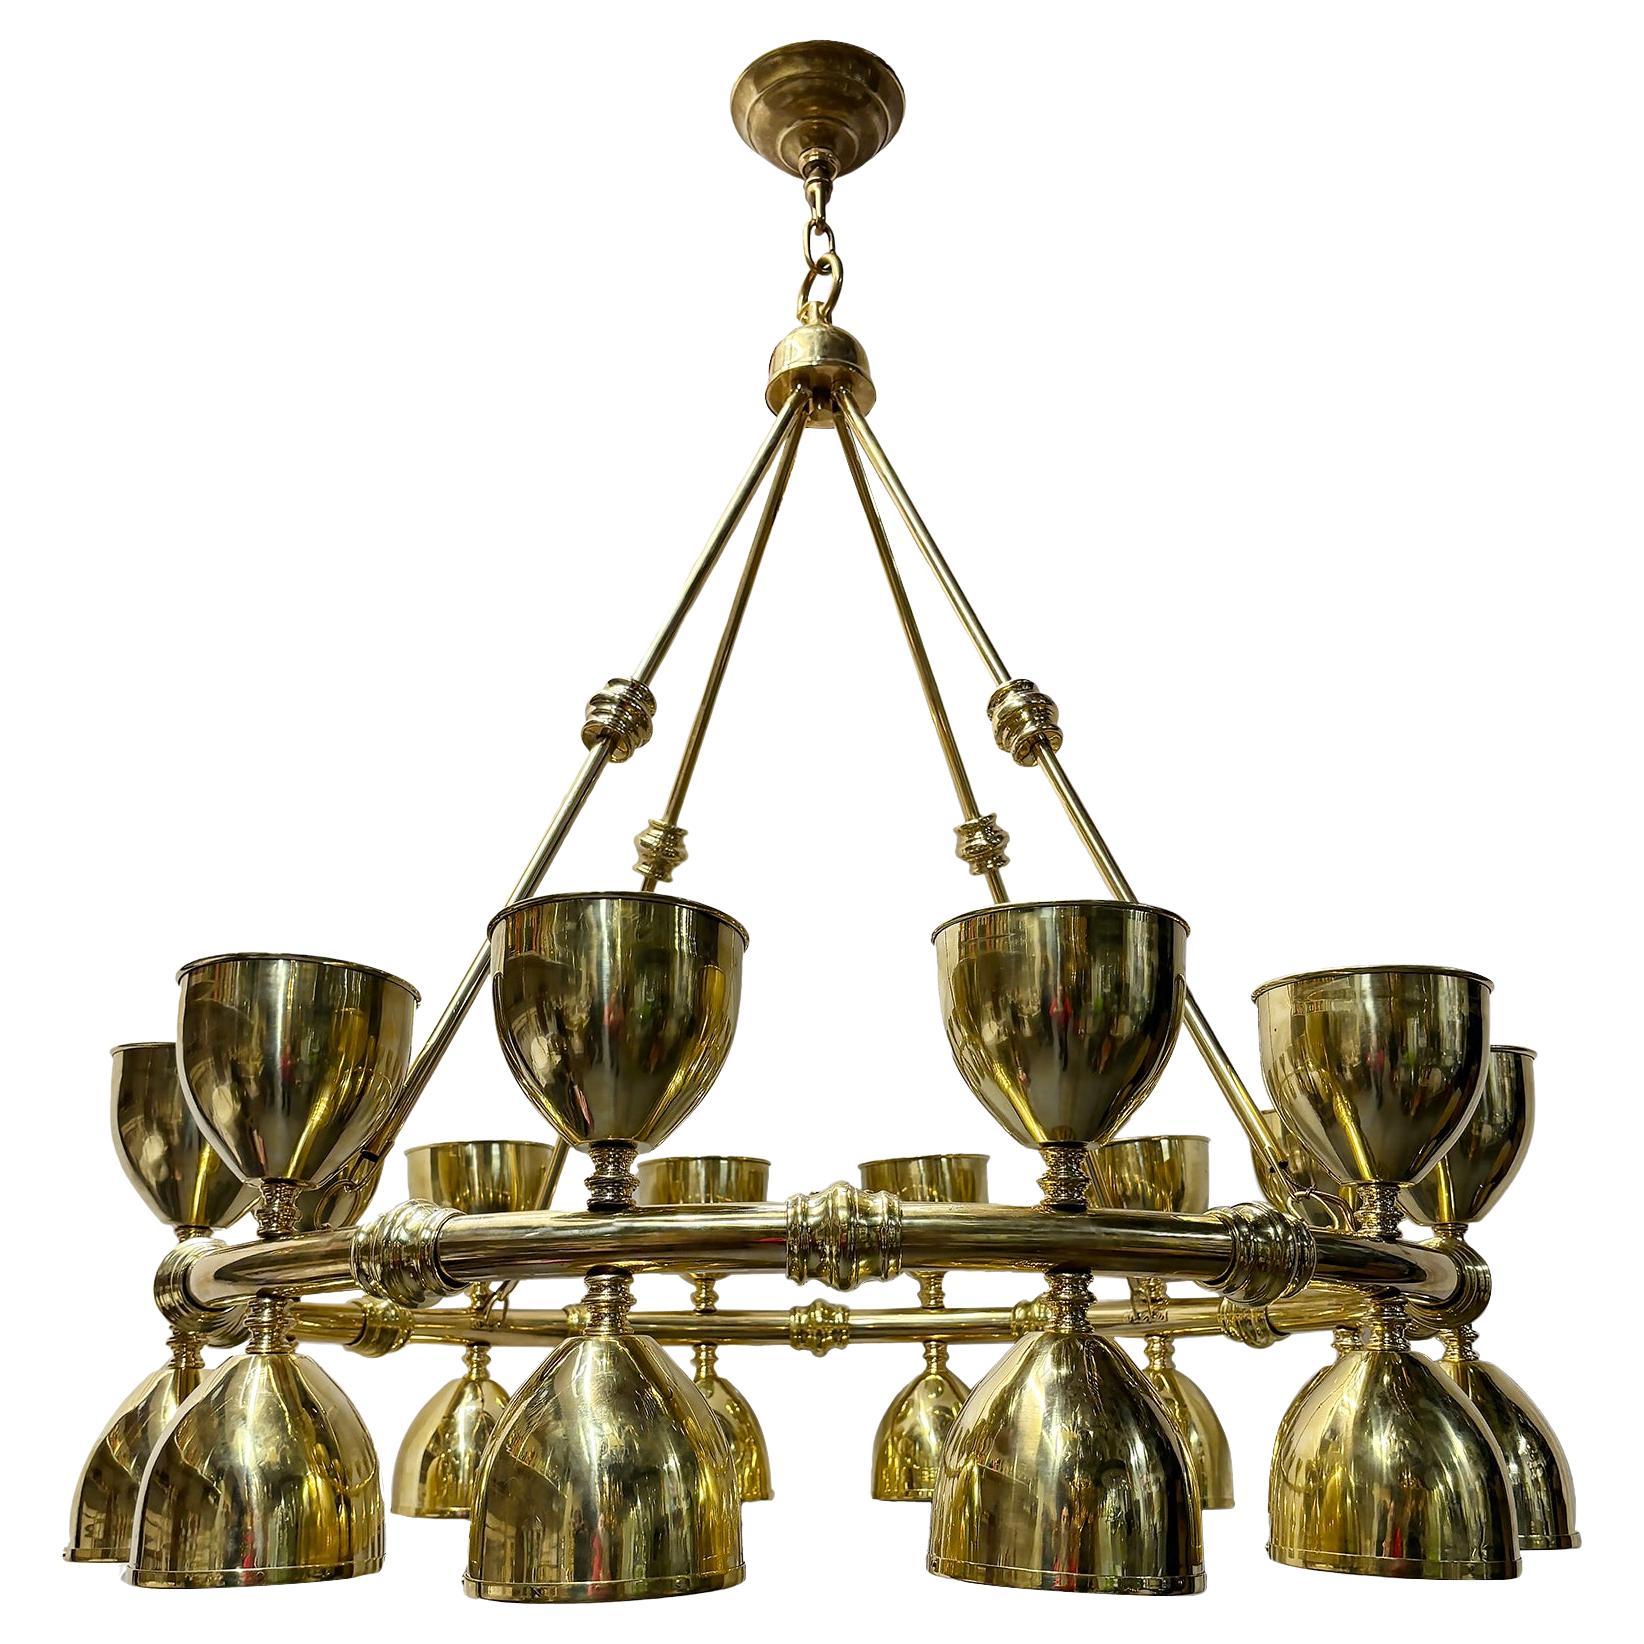 A Large Midcentury Brass Chandelier For Sale